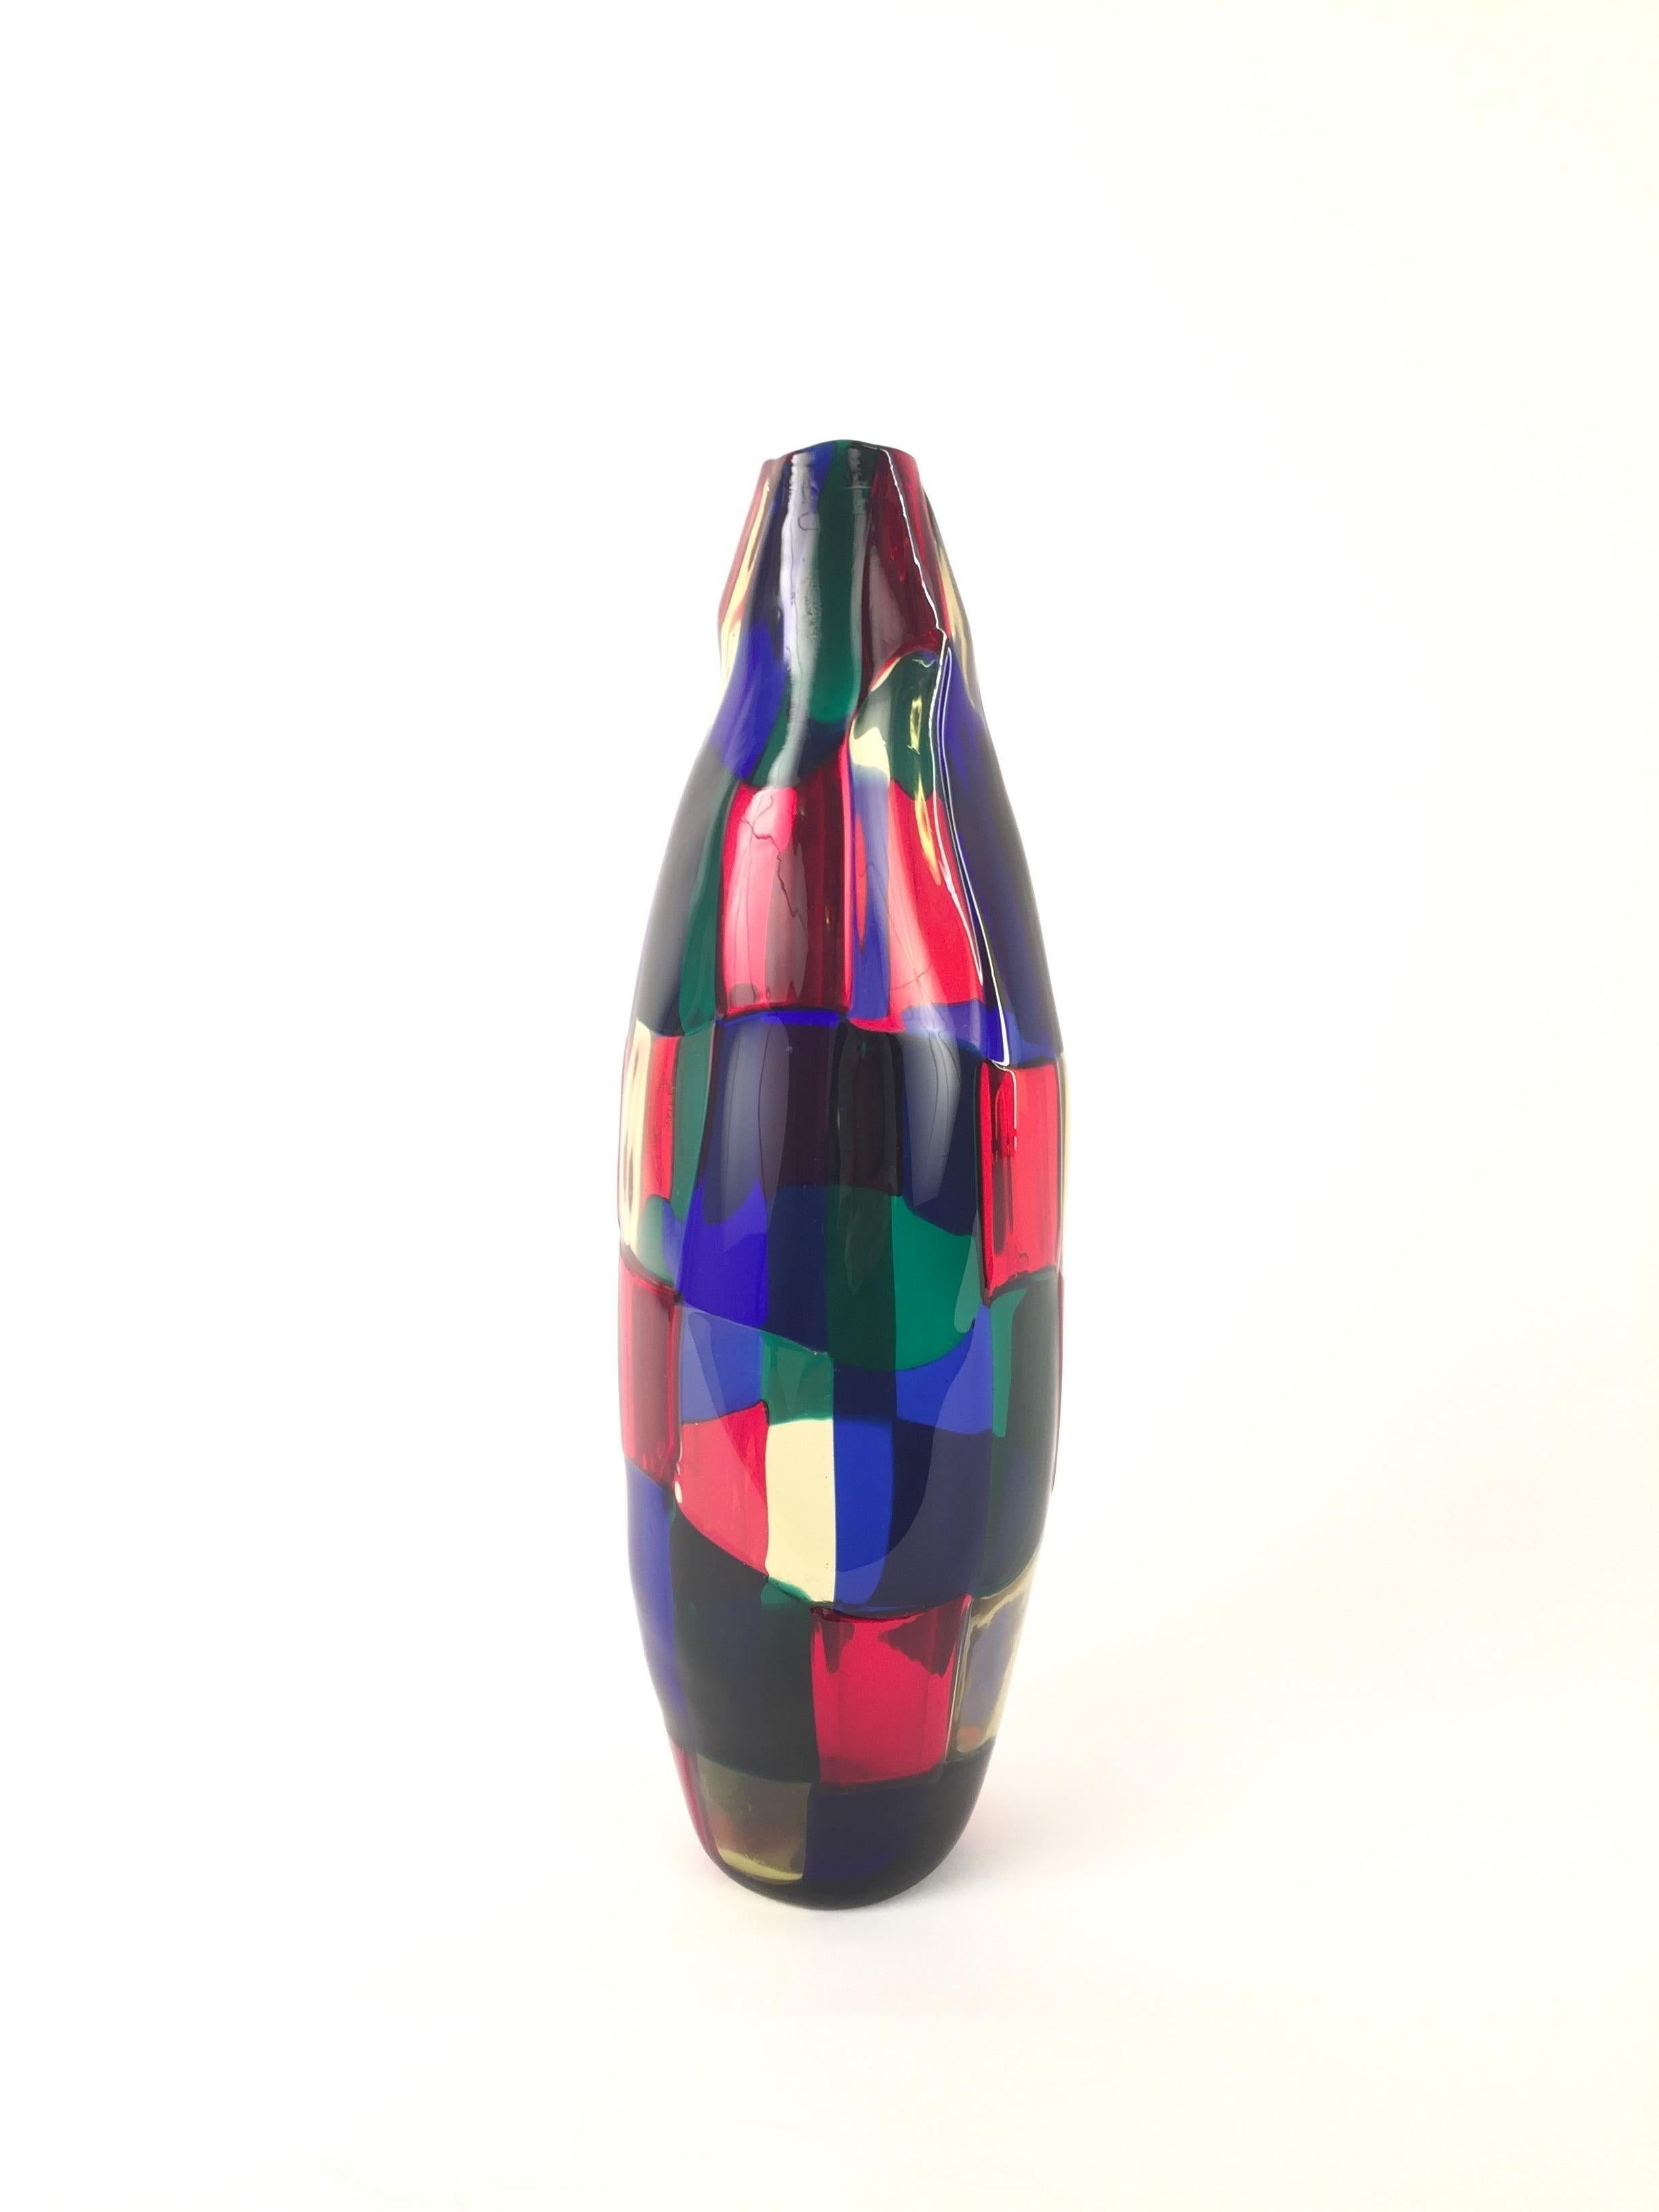 A Mid-Century Italian glass vase. Designed by Fulvio Bianconi for Venini. Pezzato Model. Blue, red and green patchwork. Signed and dated on the botton. Height 29 cm. Excellent condition.